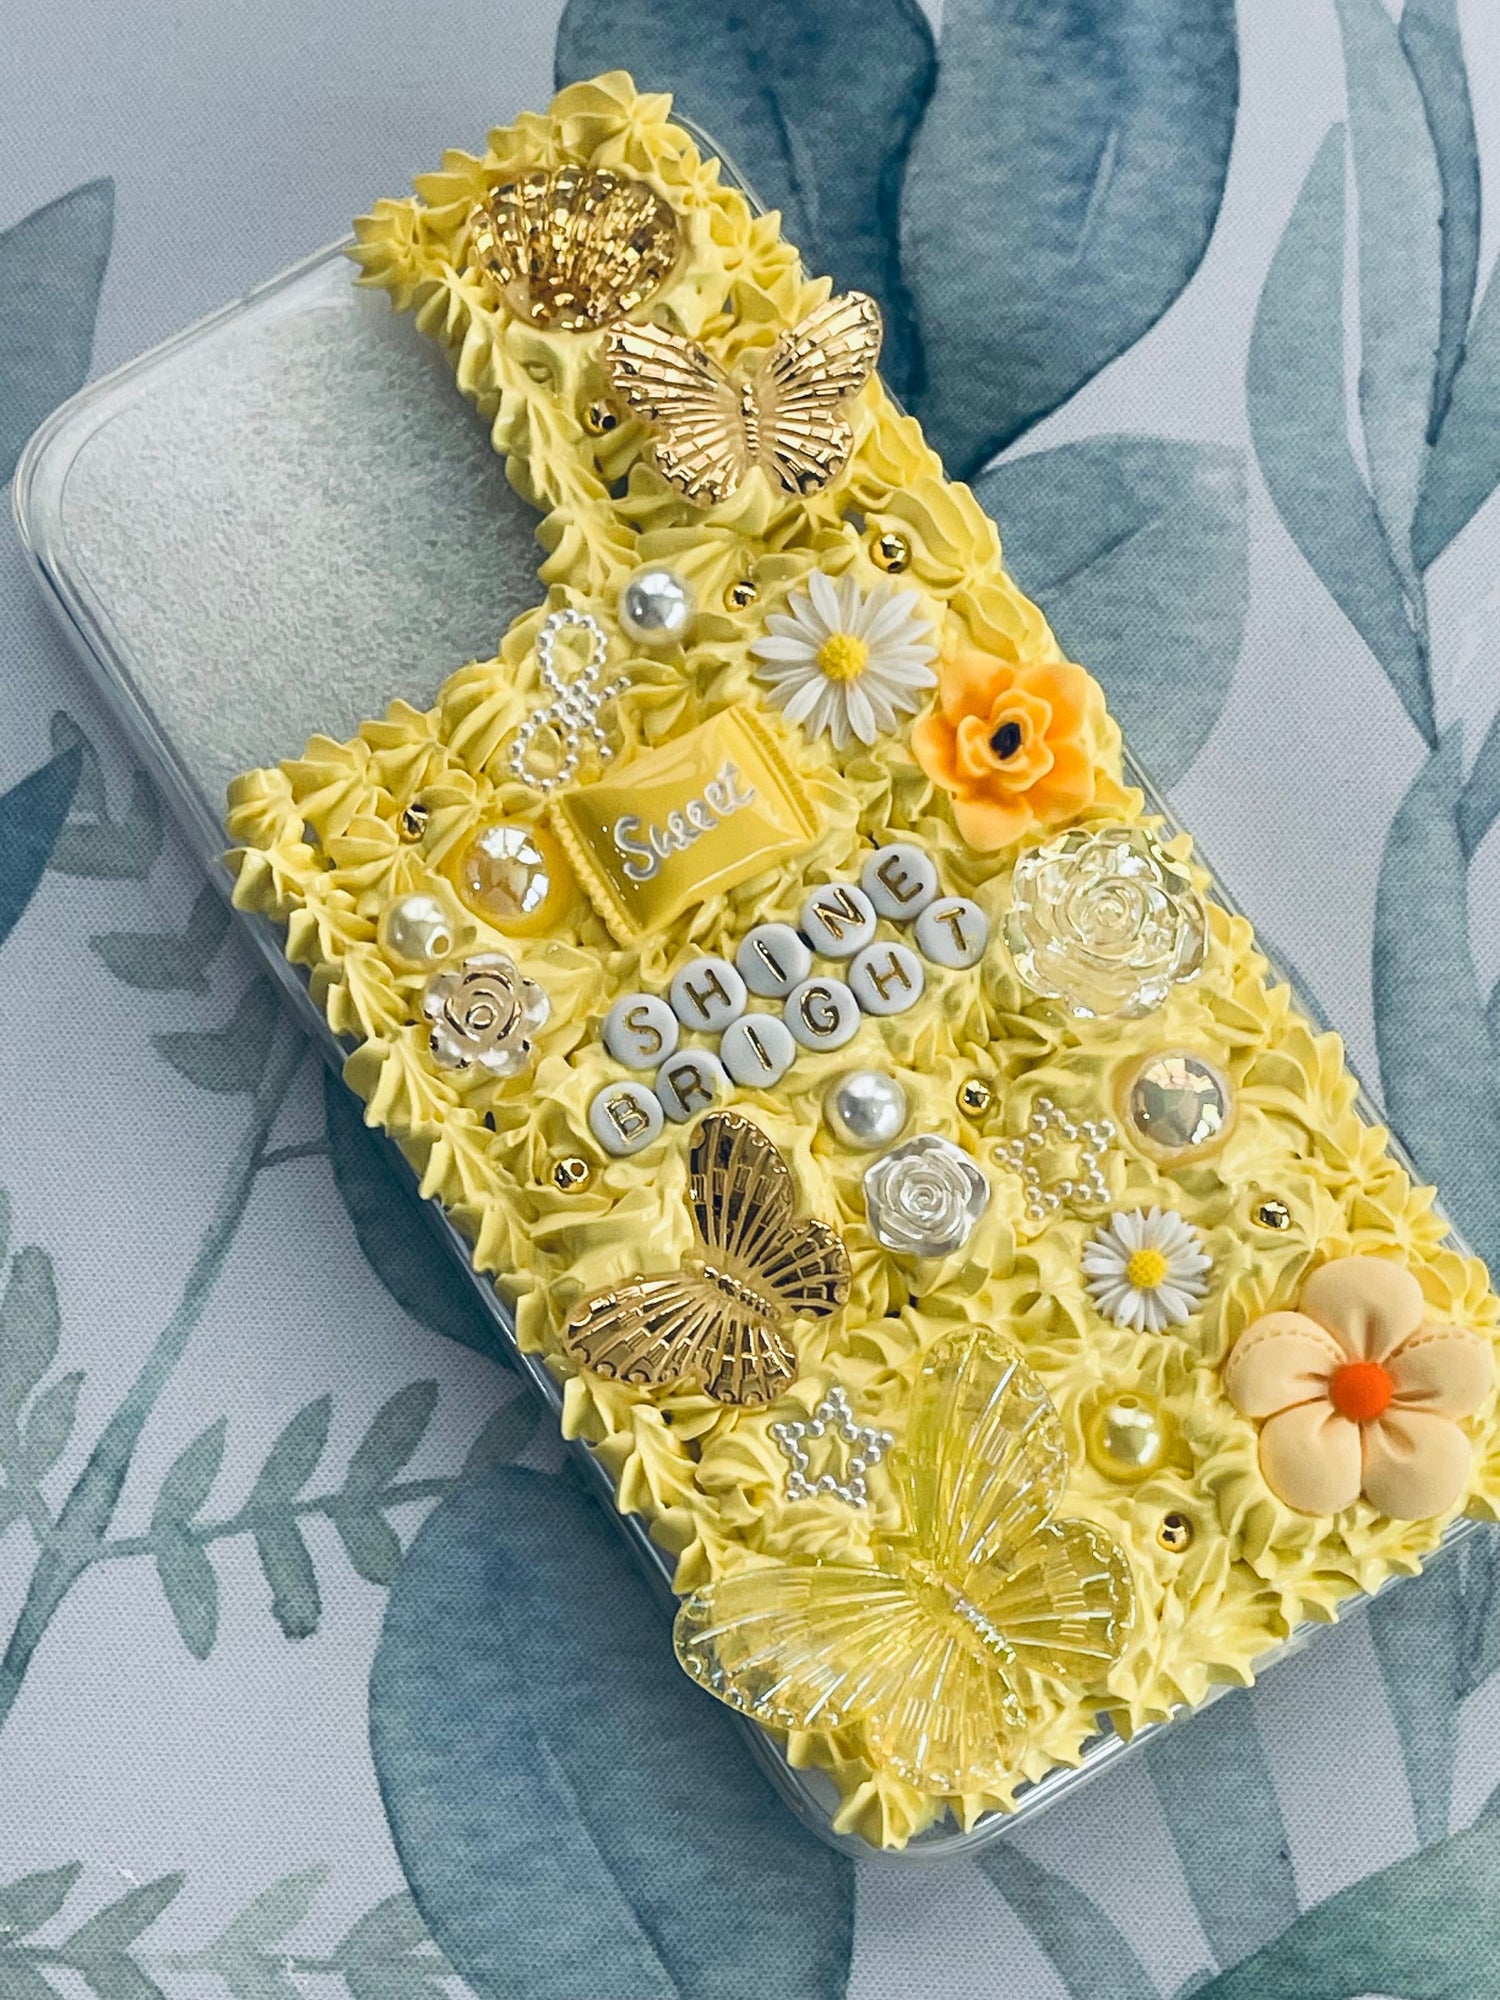 Yellow Phone Case with Name | Yellow iPhone Case with Charms | Colorful Phone Case | Cute iPhone Case | Butterfly Phone Case - Inspired BYou Home Decor